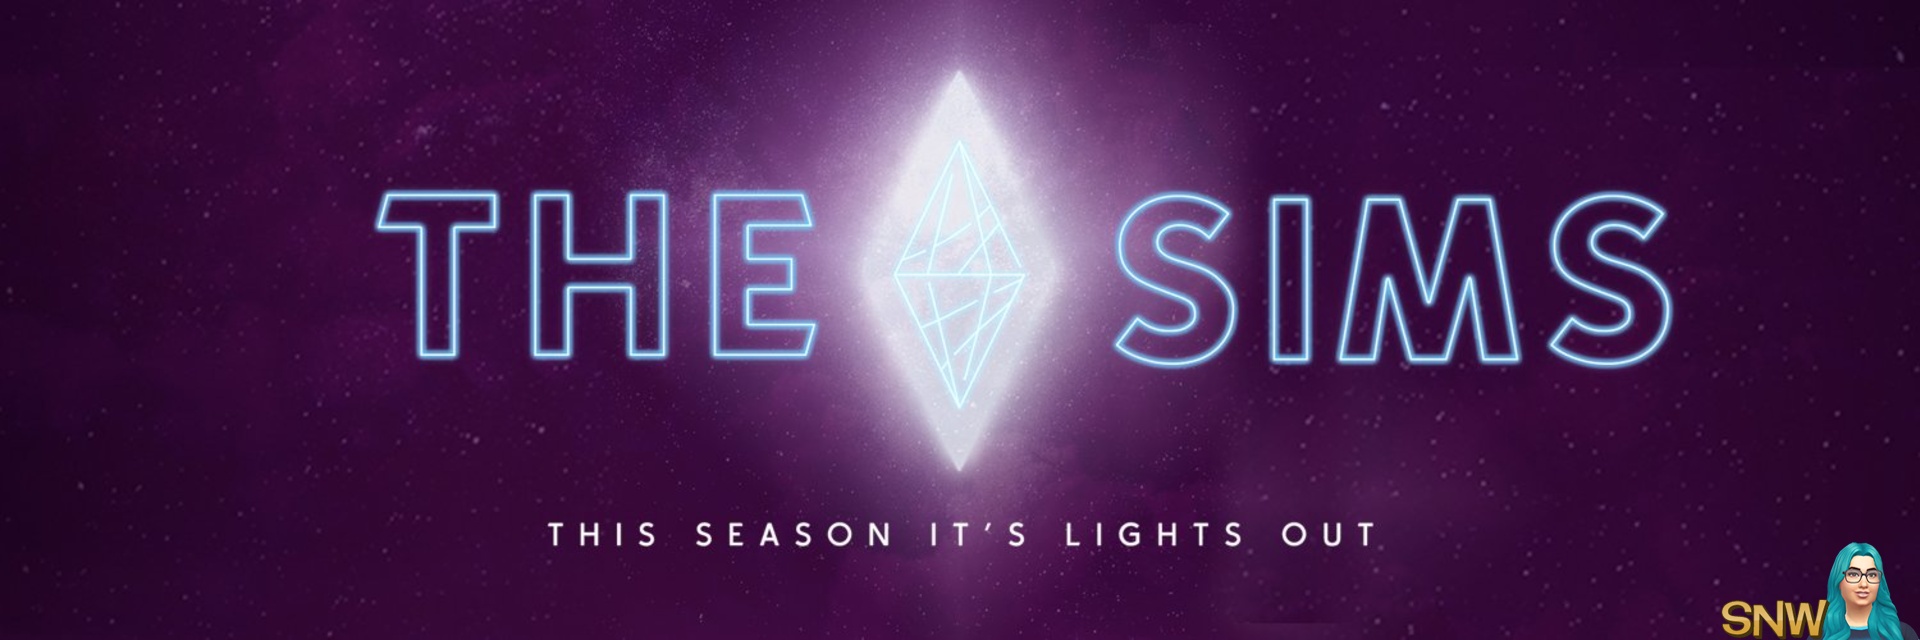 The Sims teaser "THIS SEASON IT'S LIGHTS OUT"